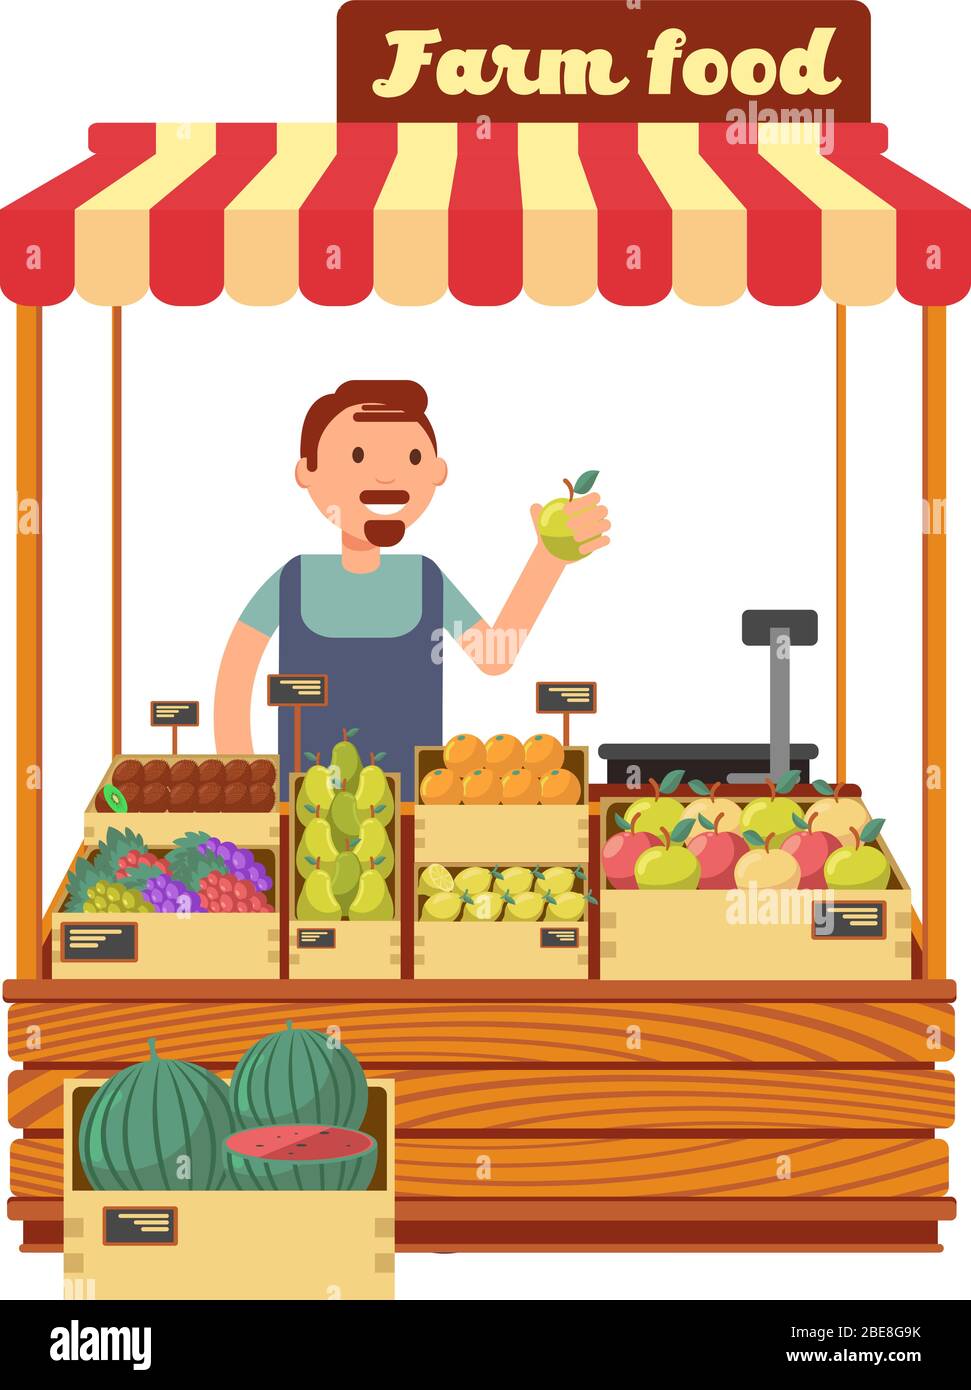 Vegetable and fruit stand Cut Out Stock Images & Pictures - Alamy